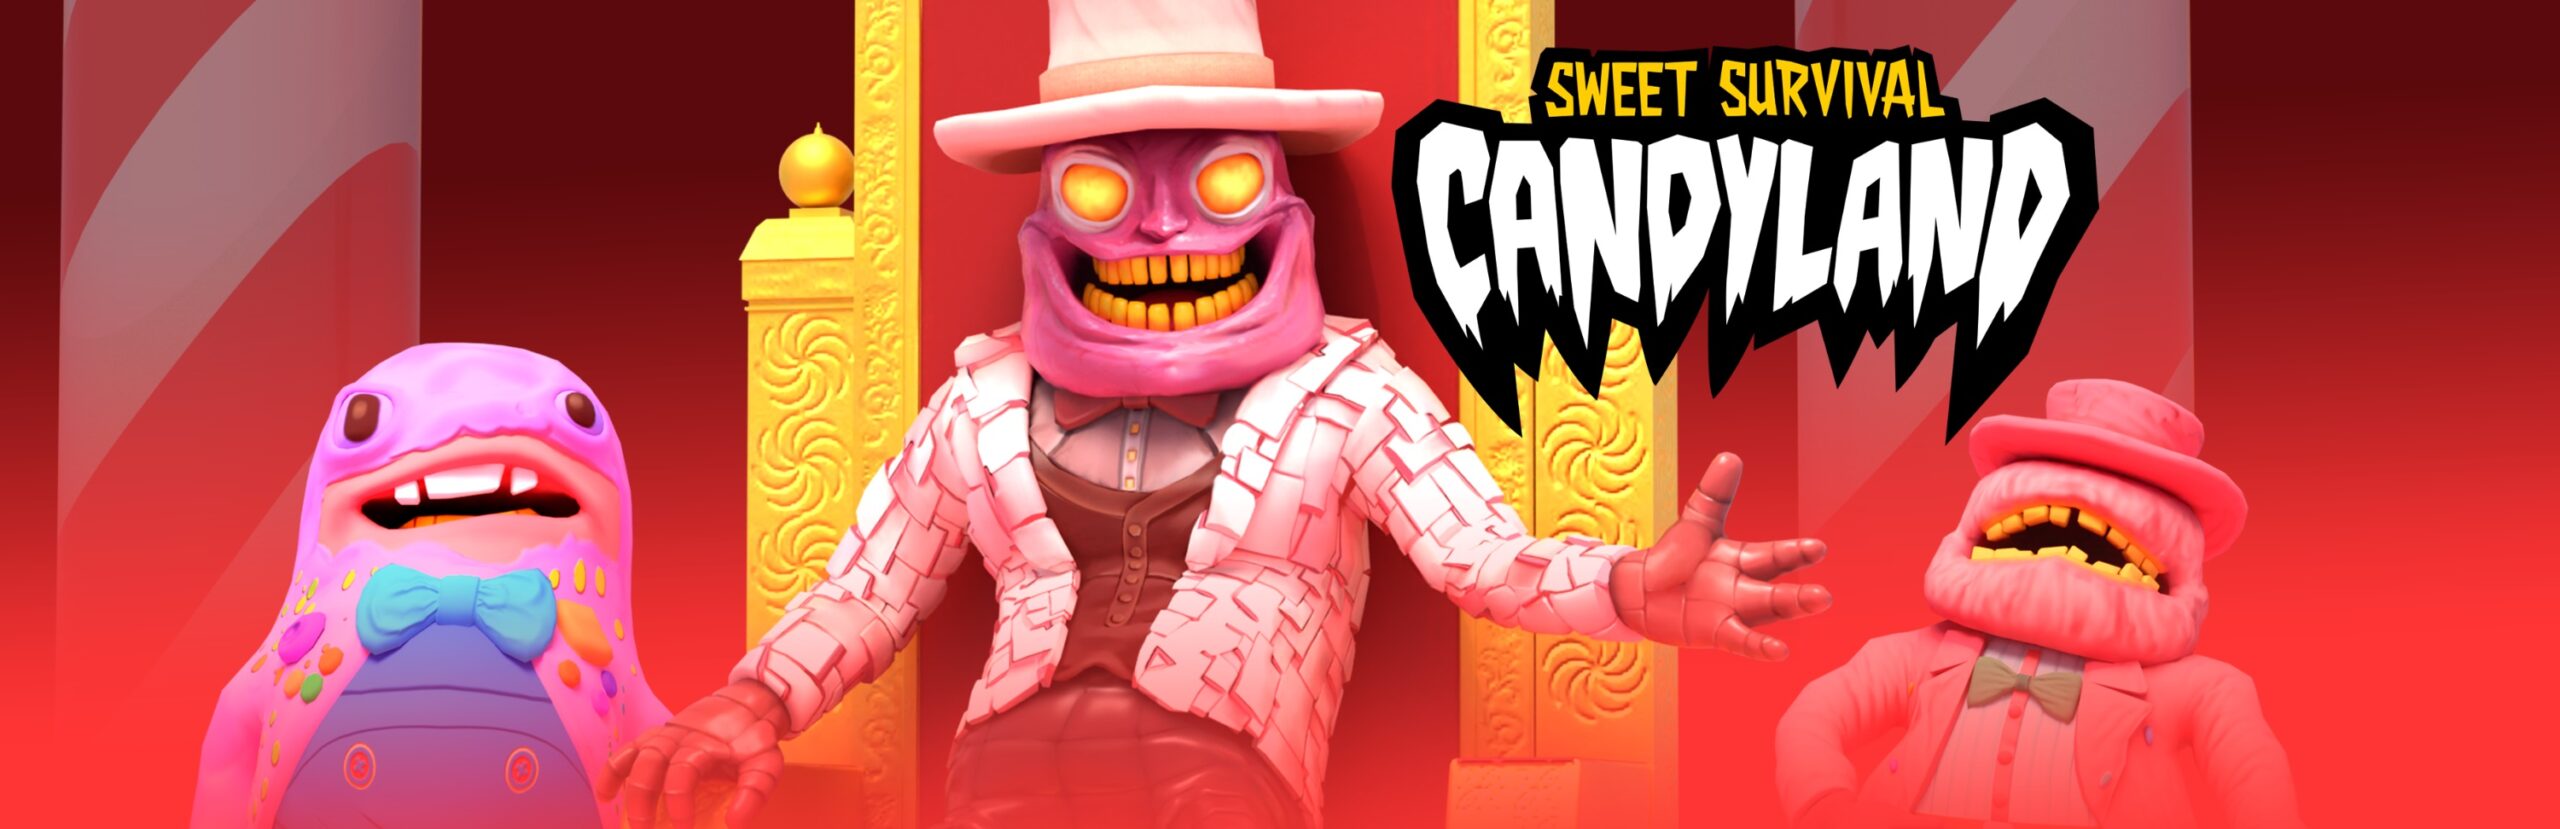 Candyland: Sweet Survival looks like Five Nights at Freddy’s meets Willy Wonka